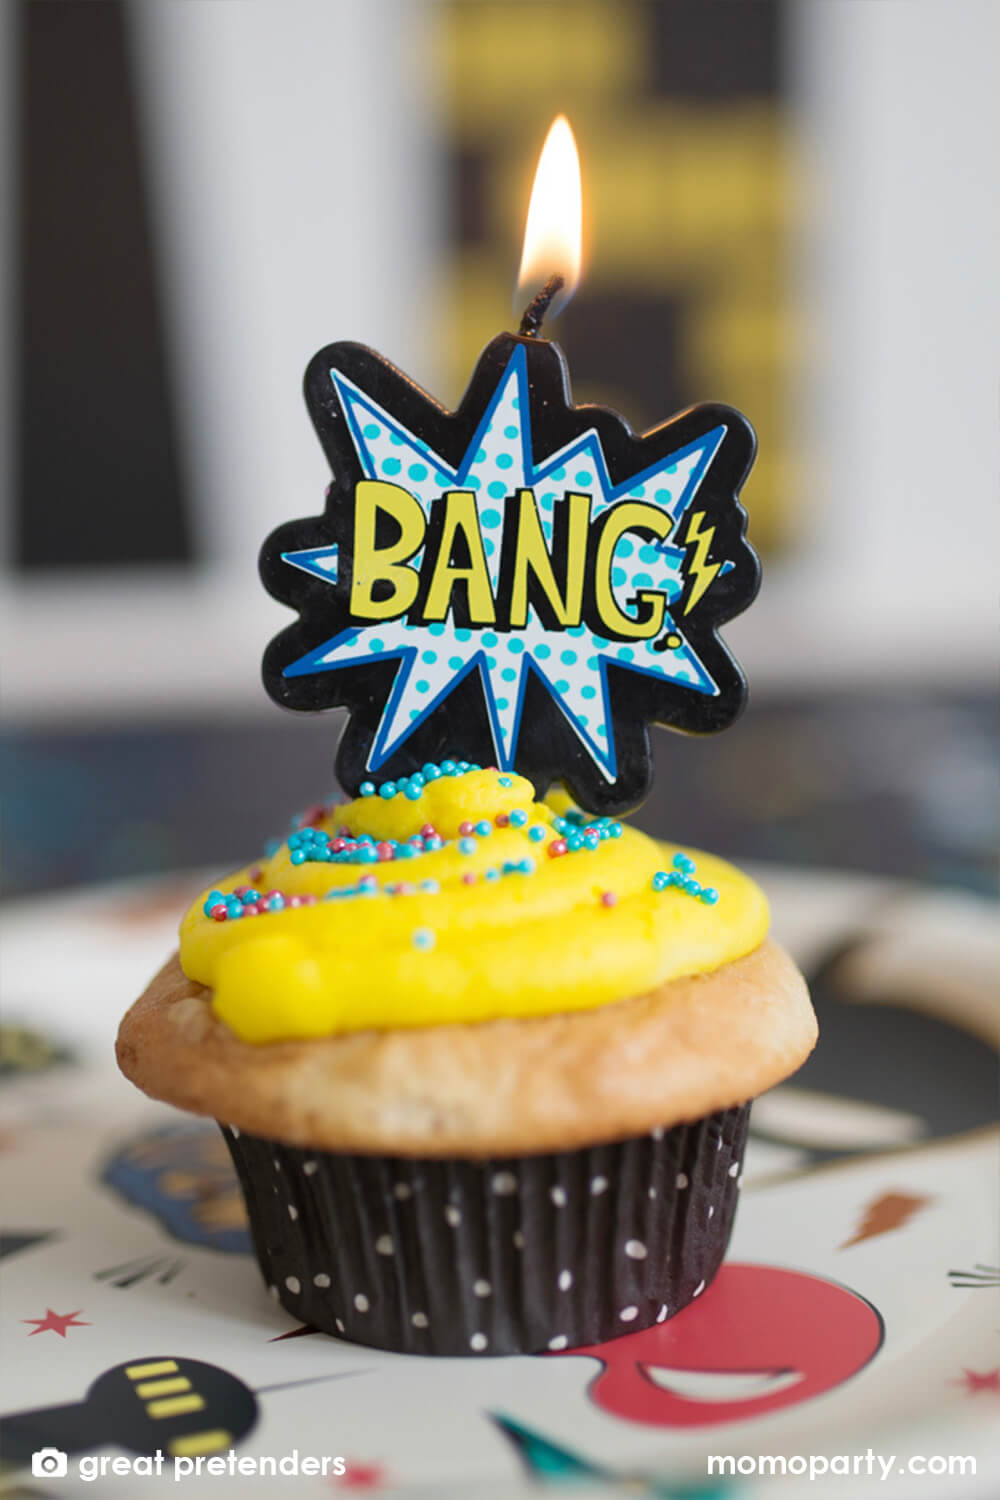 Superhero Candles by Great Pretenders. The comic action bubbles shaped with "Bang" text wax candle on a Cupcake. Celebrating a superhero themed birthday party, or father's day celebration